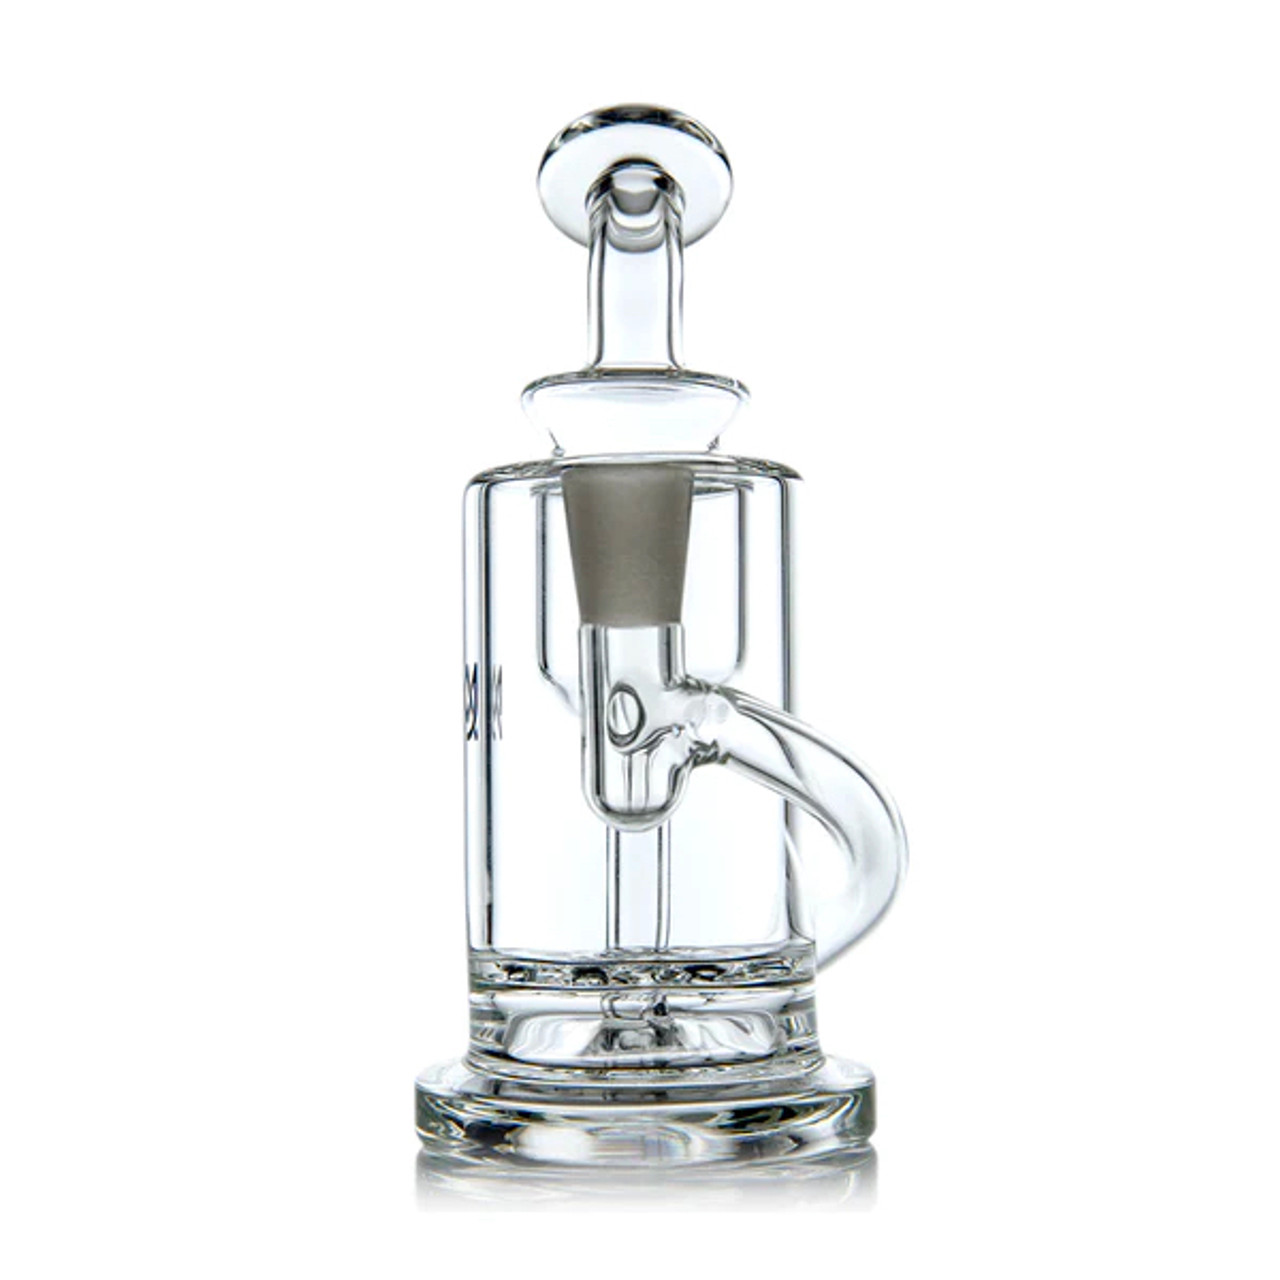 The Best Dab Rig Kits - Complete Torch Dab Kits